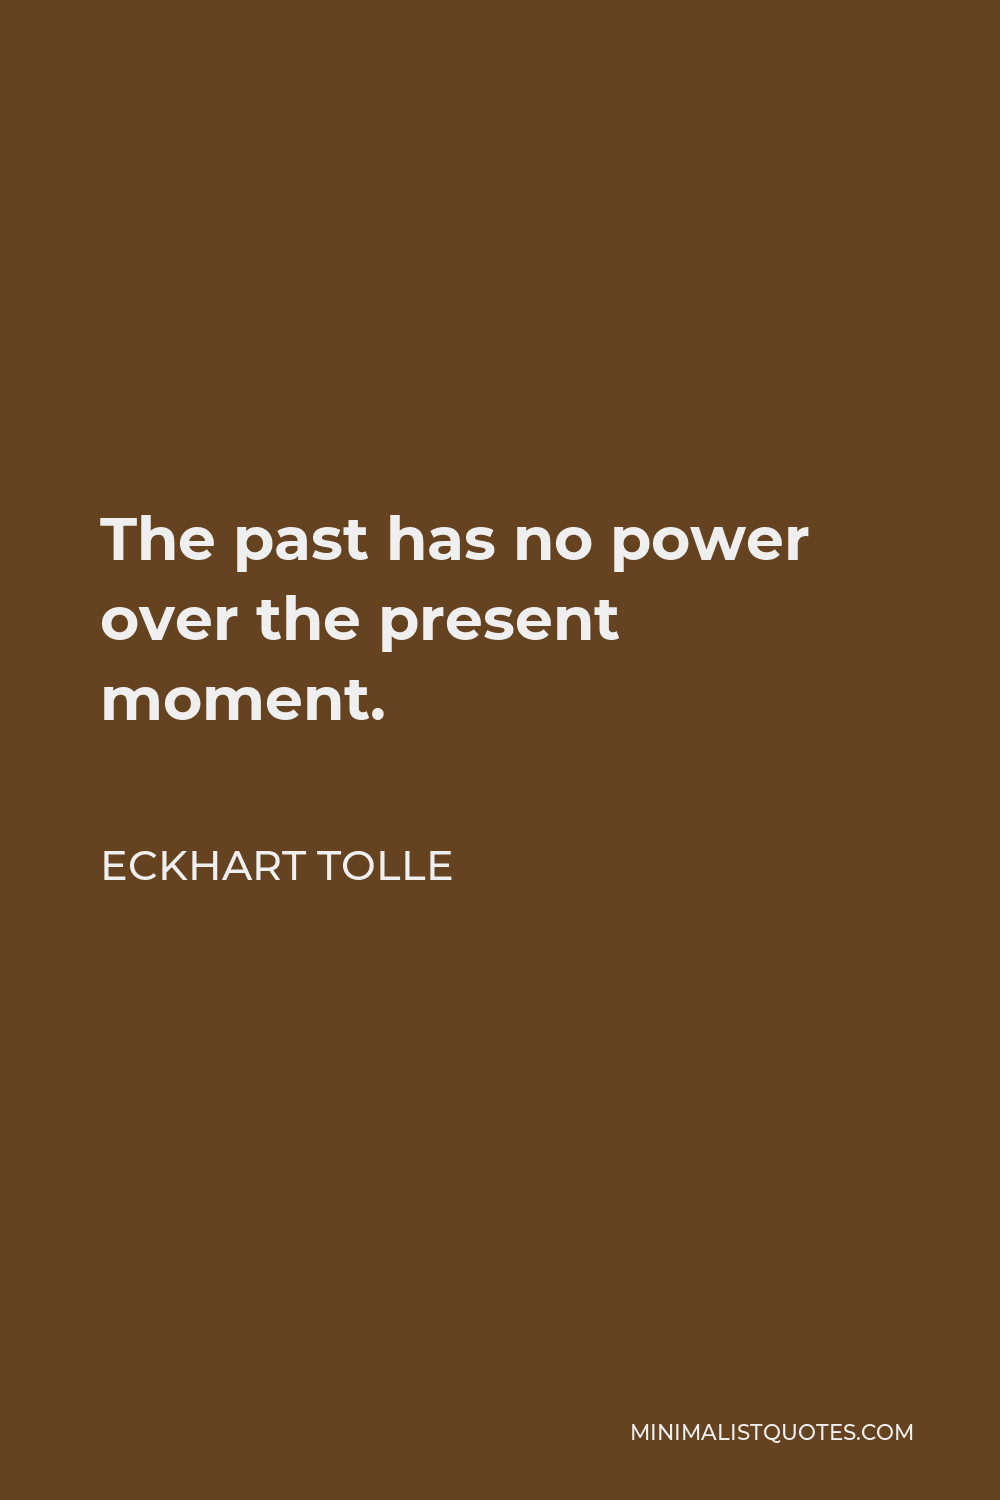 Eckhart Tolle Quote: The past has no power over the present moment.